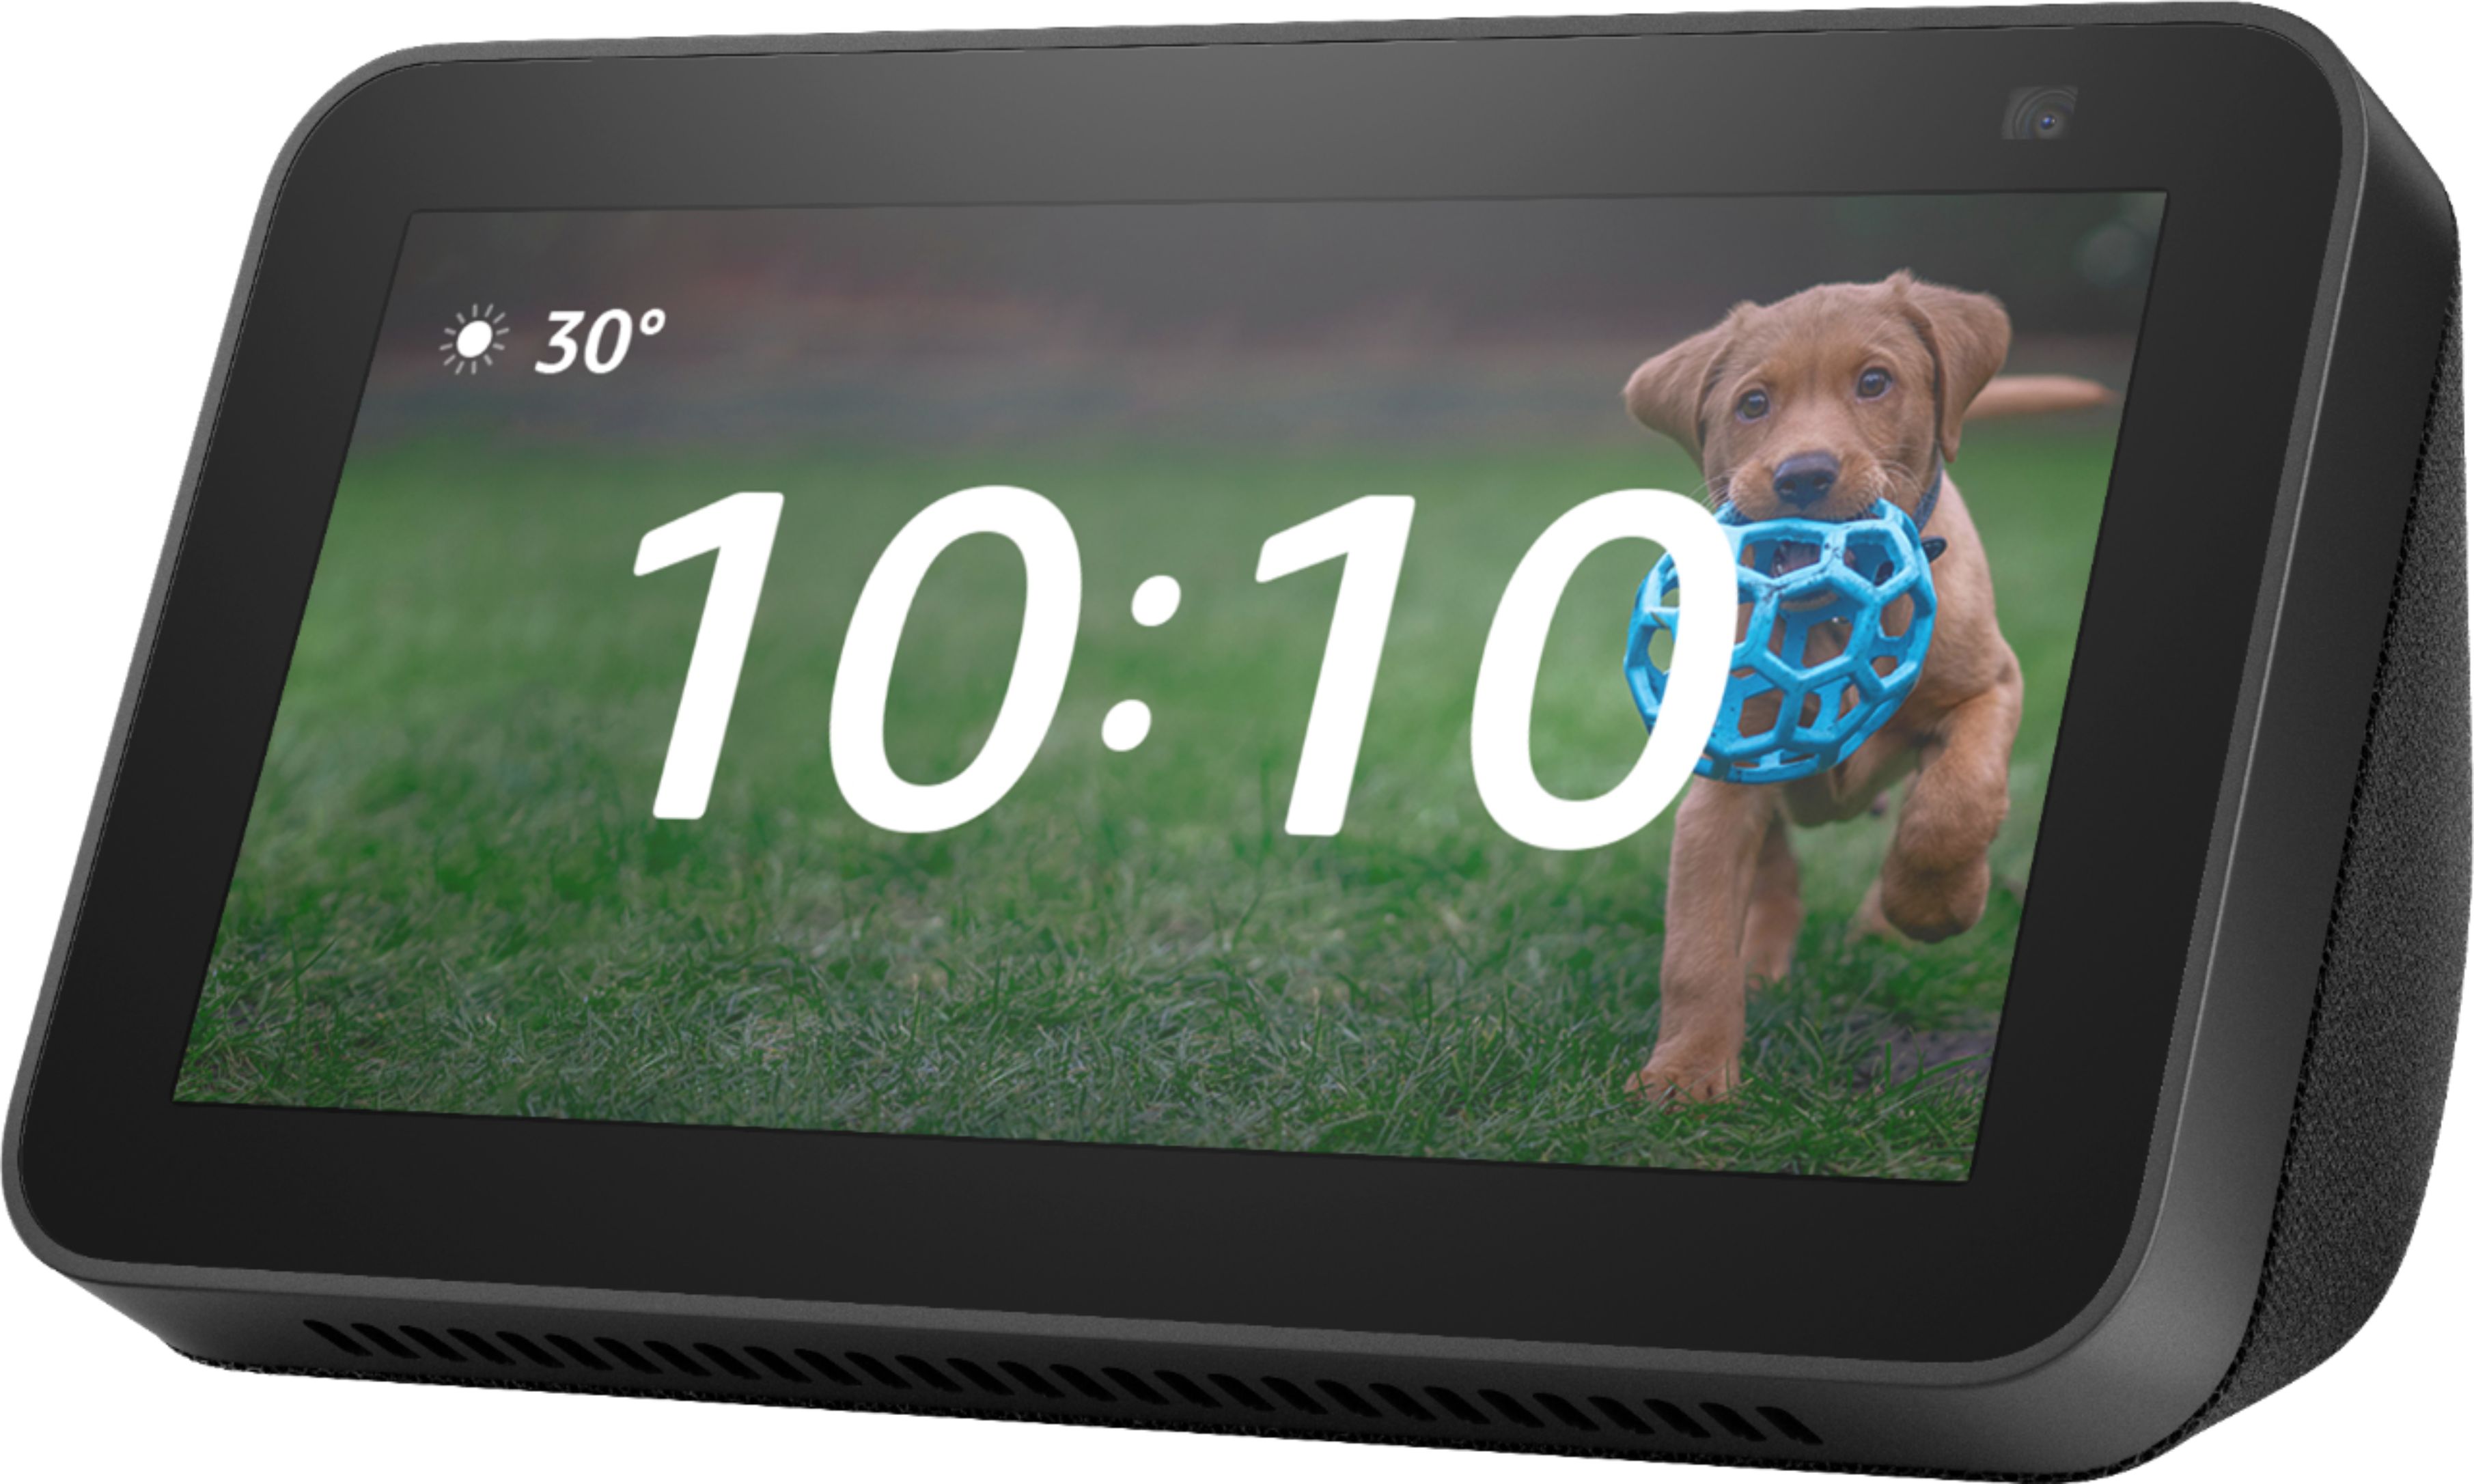 Zoom in on Front Zoom. Amazon - Echo Show 5 (2nd Gen) Smart Display with Alexa - Charcoal.